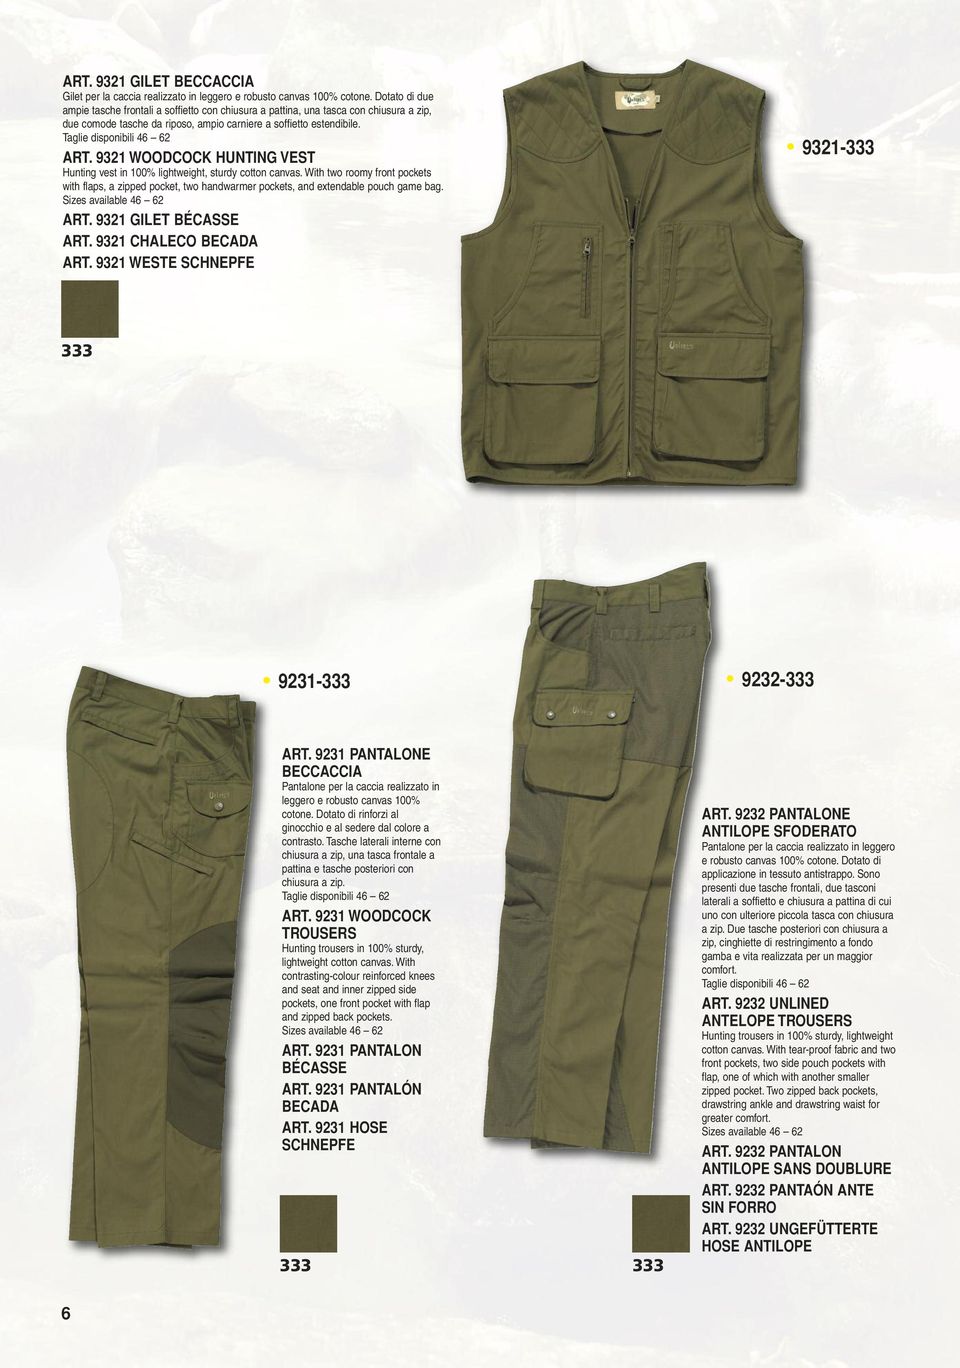 9321 WOODCOCK HUNTING VEST Hunting vest in 100% lightweight, sturdy cotton canvas. With two roomy front pockets with flaps, a zipped pocket, two handwarmer pockets, and extendable pouch game bag. ART.